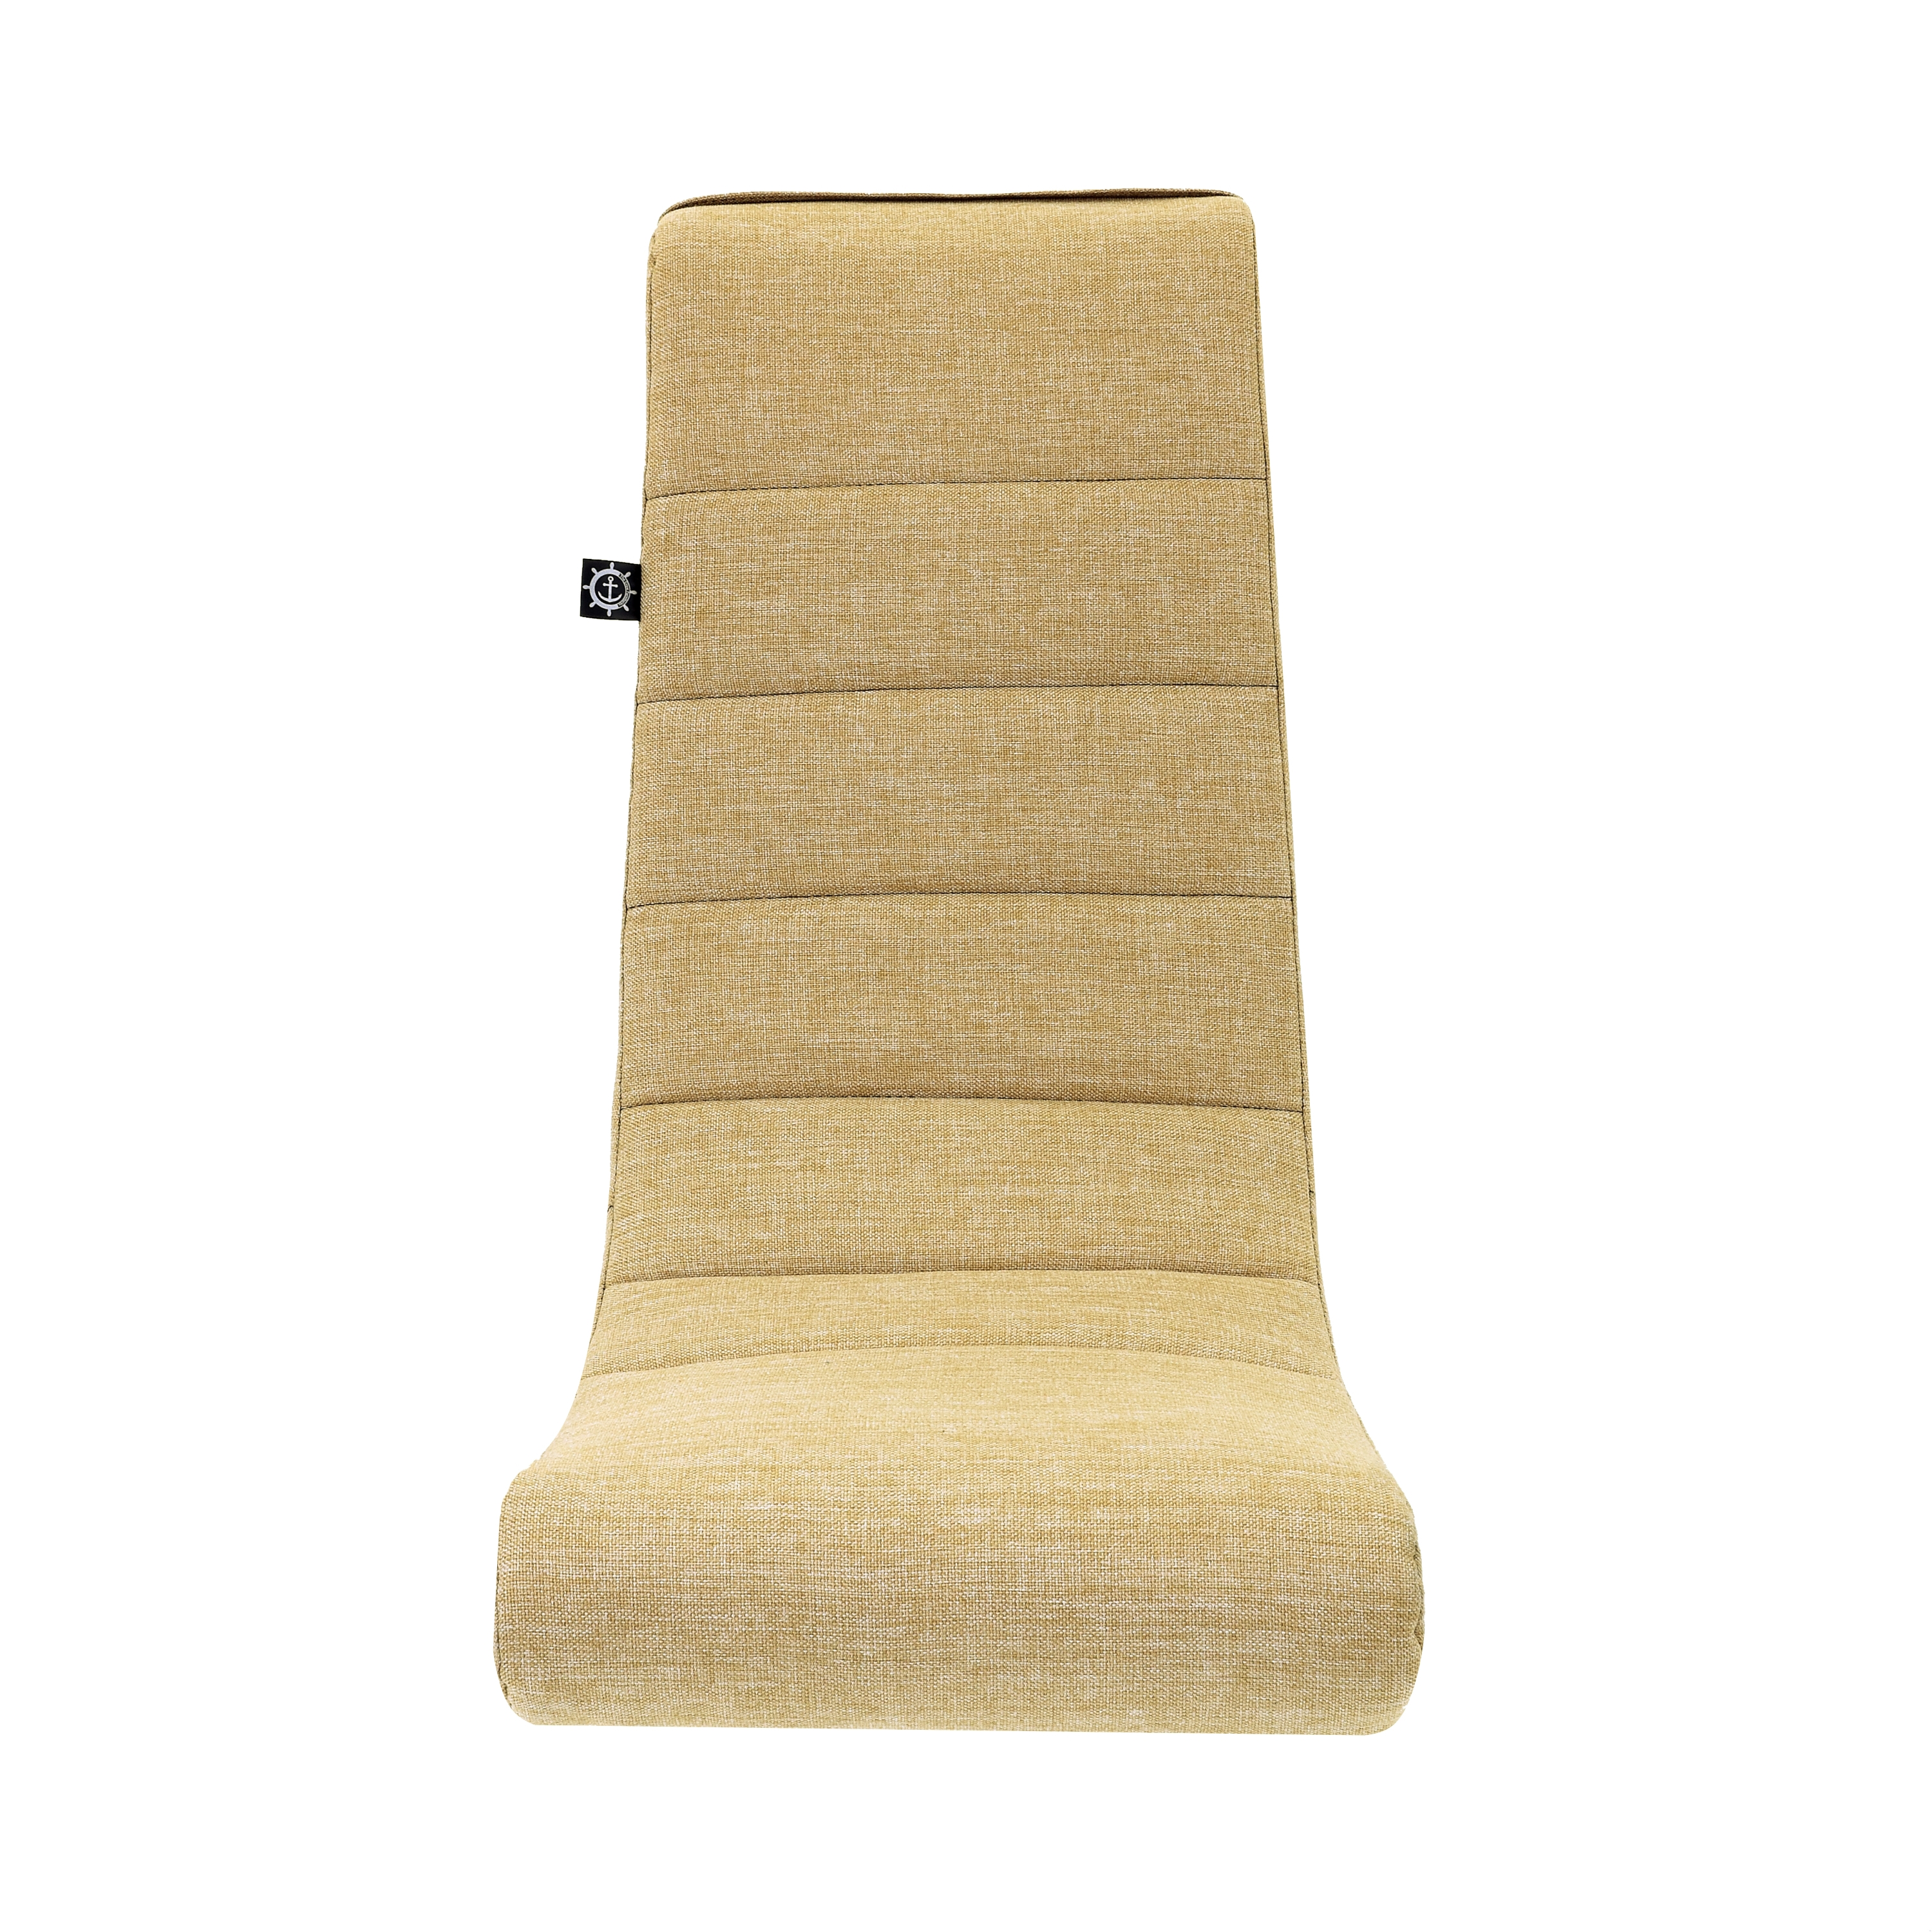 The Crew Furniture Classic Video Rocker Floor Gaming Chair, Kids and Teens, Polyester Linen, Camel - image 4 of 9